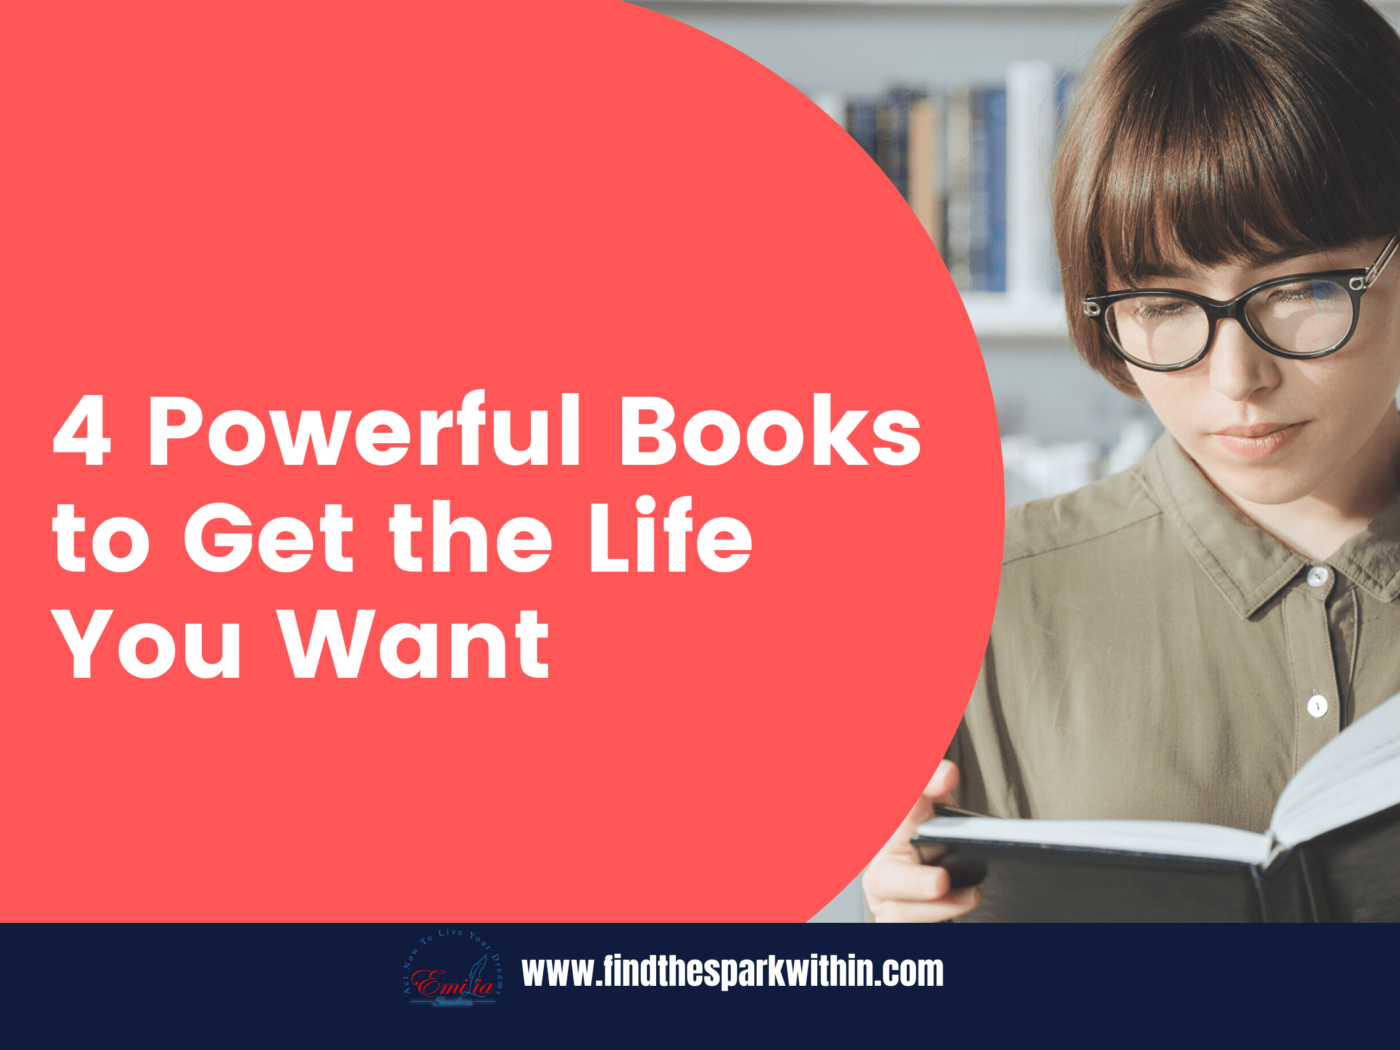 4 Powerful Books to Get the Life You Want